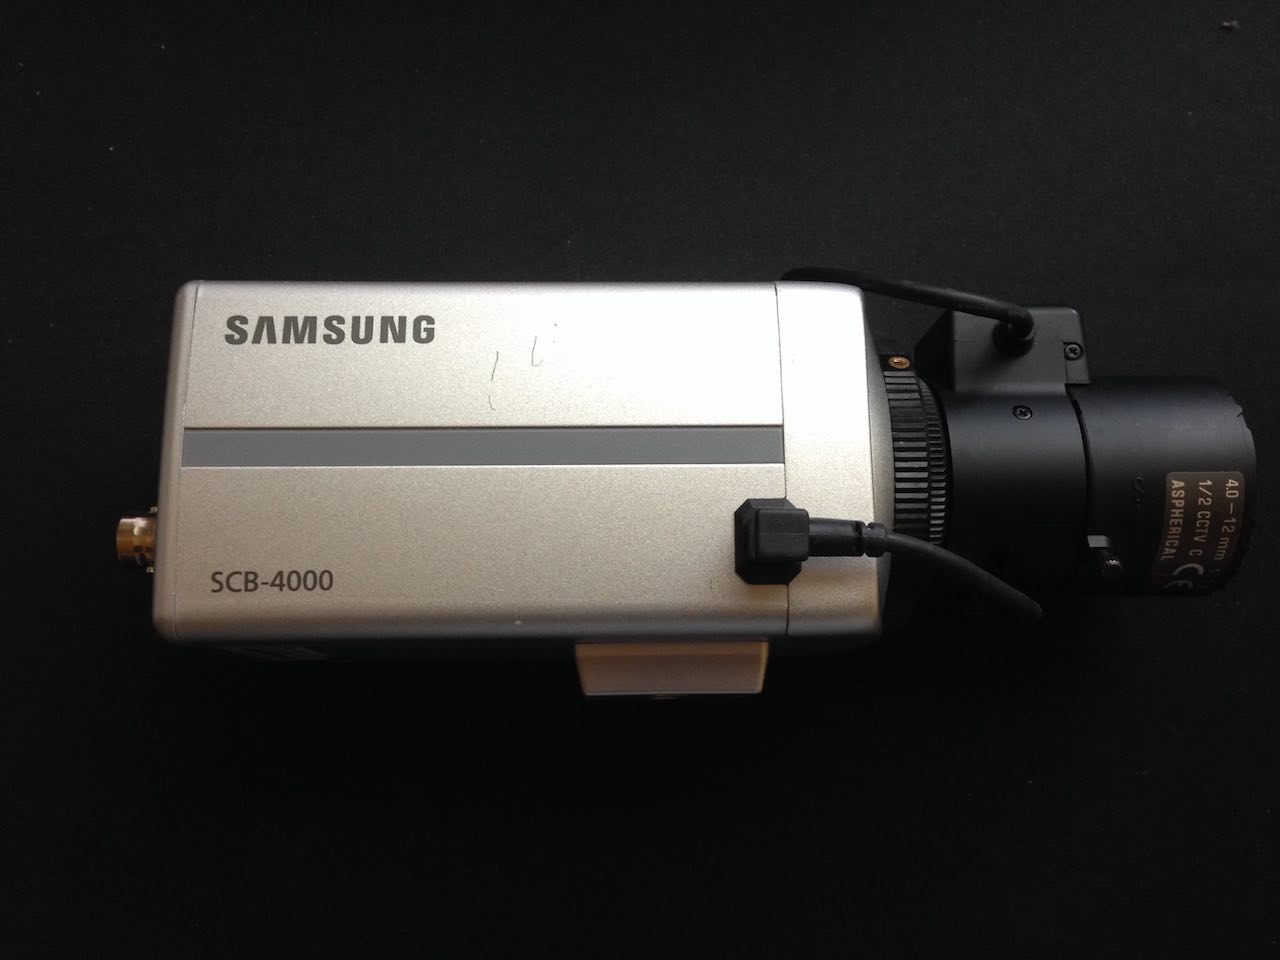 Samsung SCB-4000 IR Filter Removal (Photo Guide)